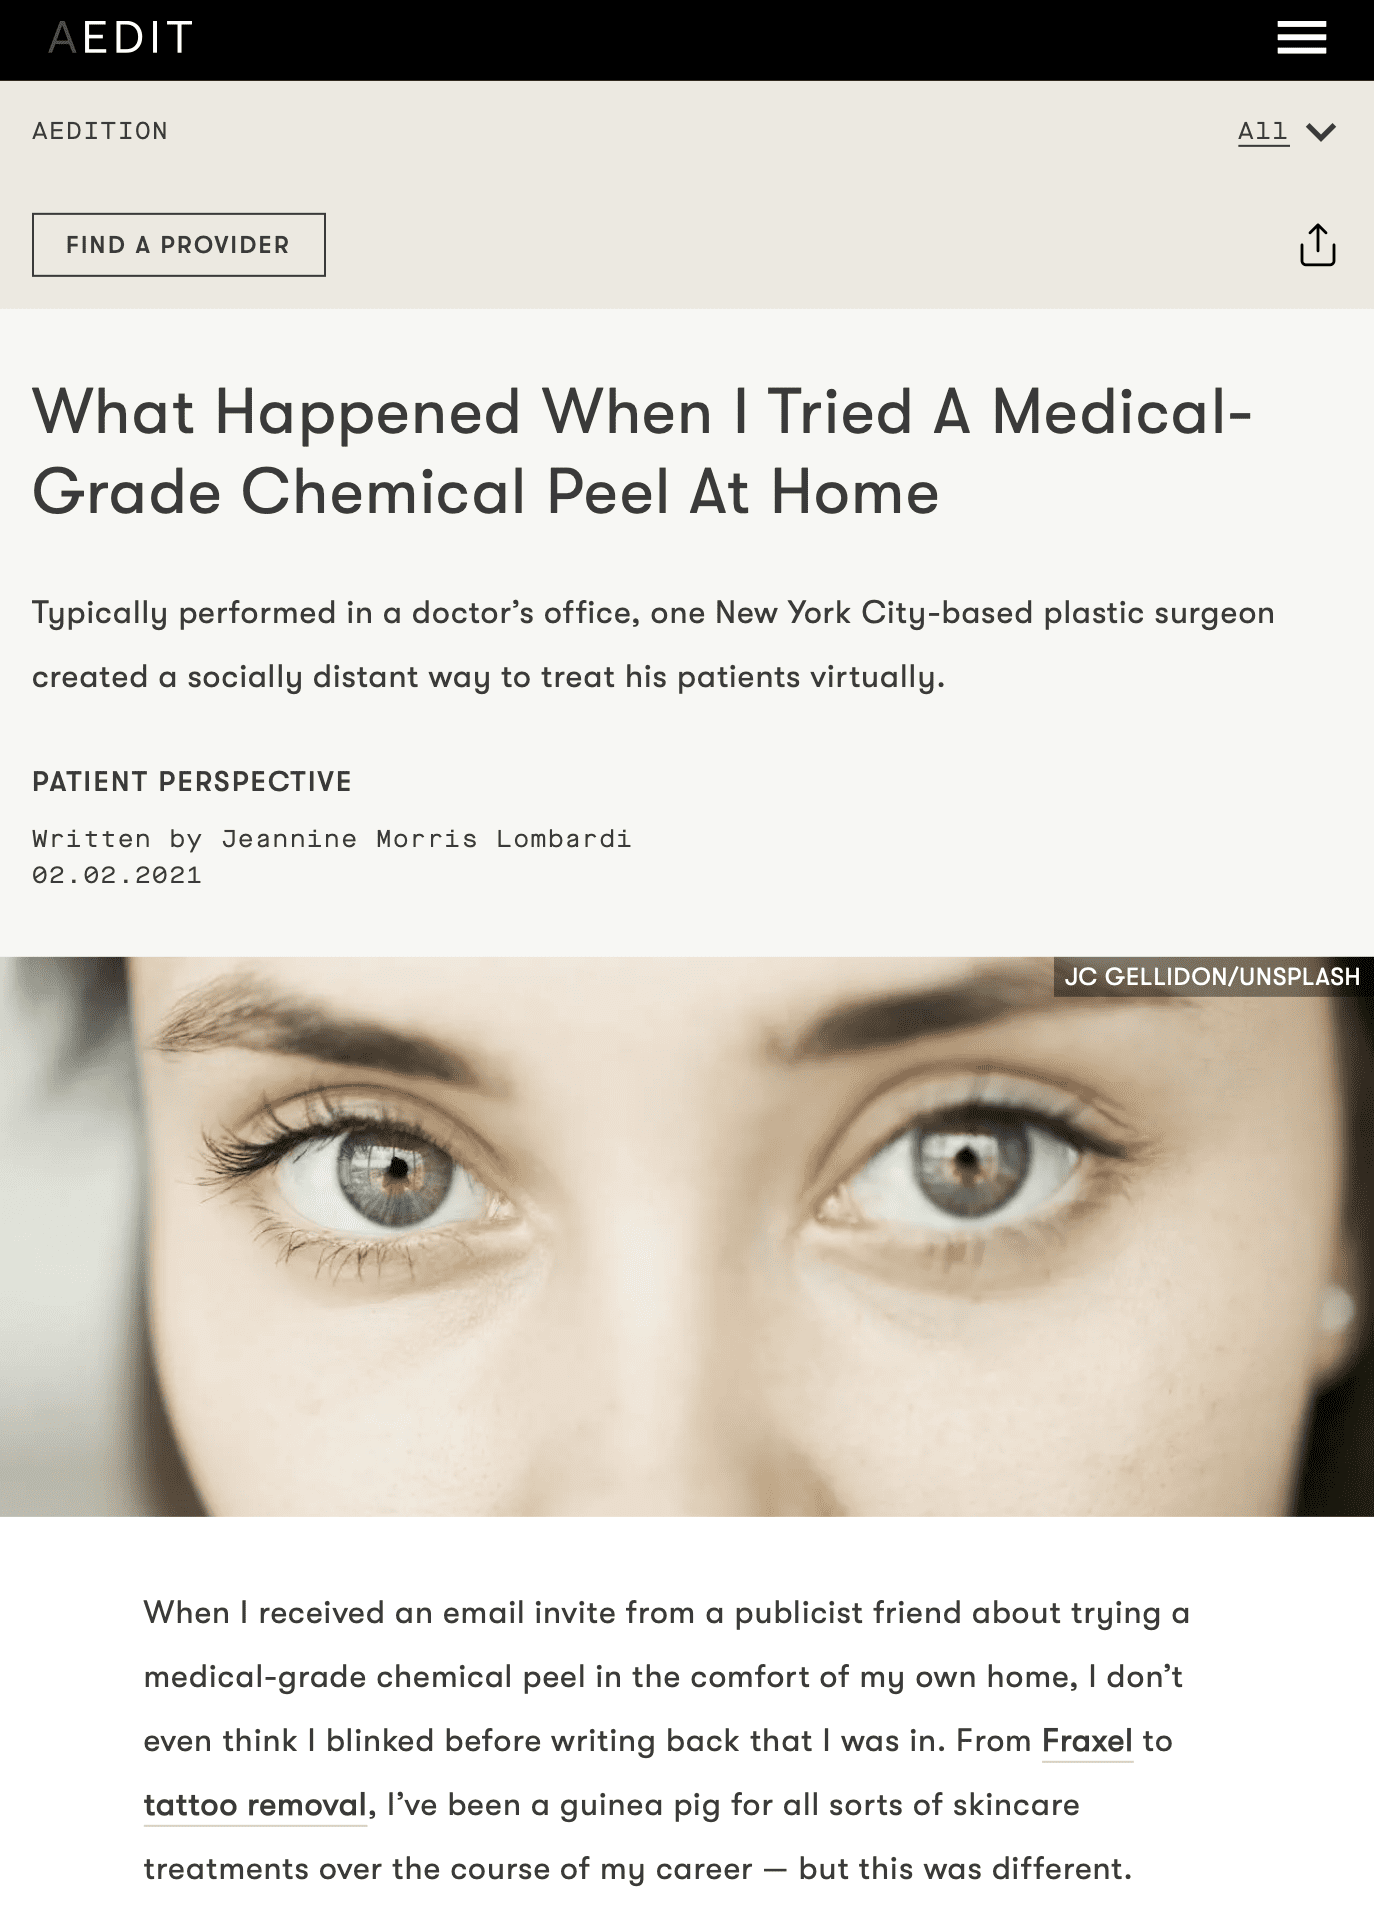 what-happened-when-i-tried-a-medical-grade-chemical-peel-at-home-_-aedition